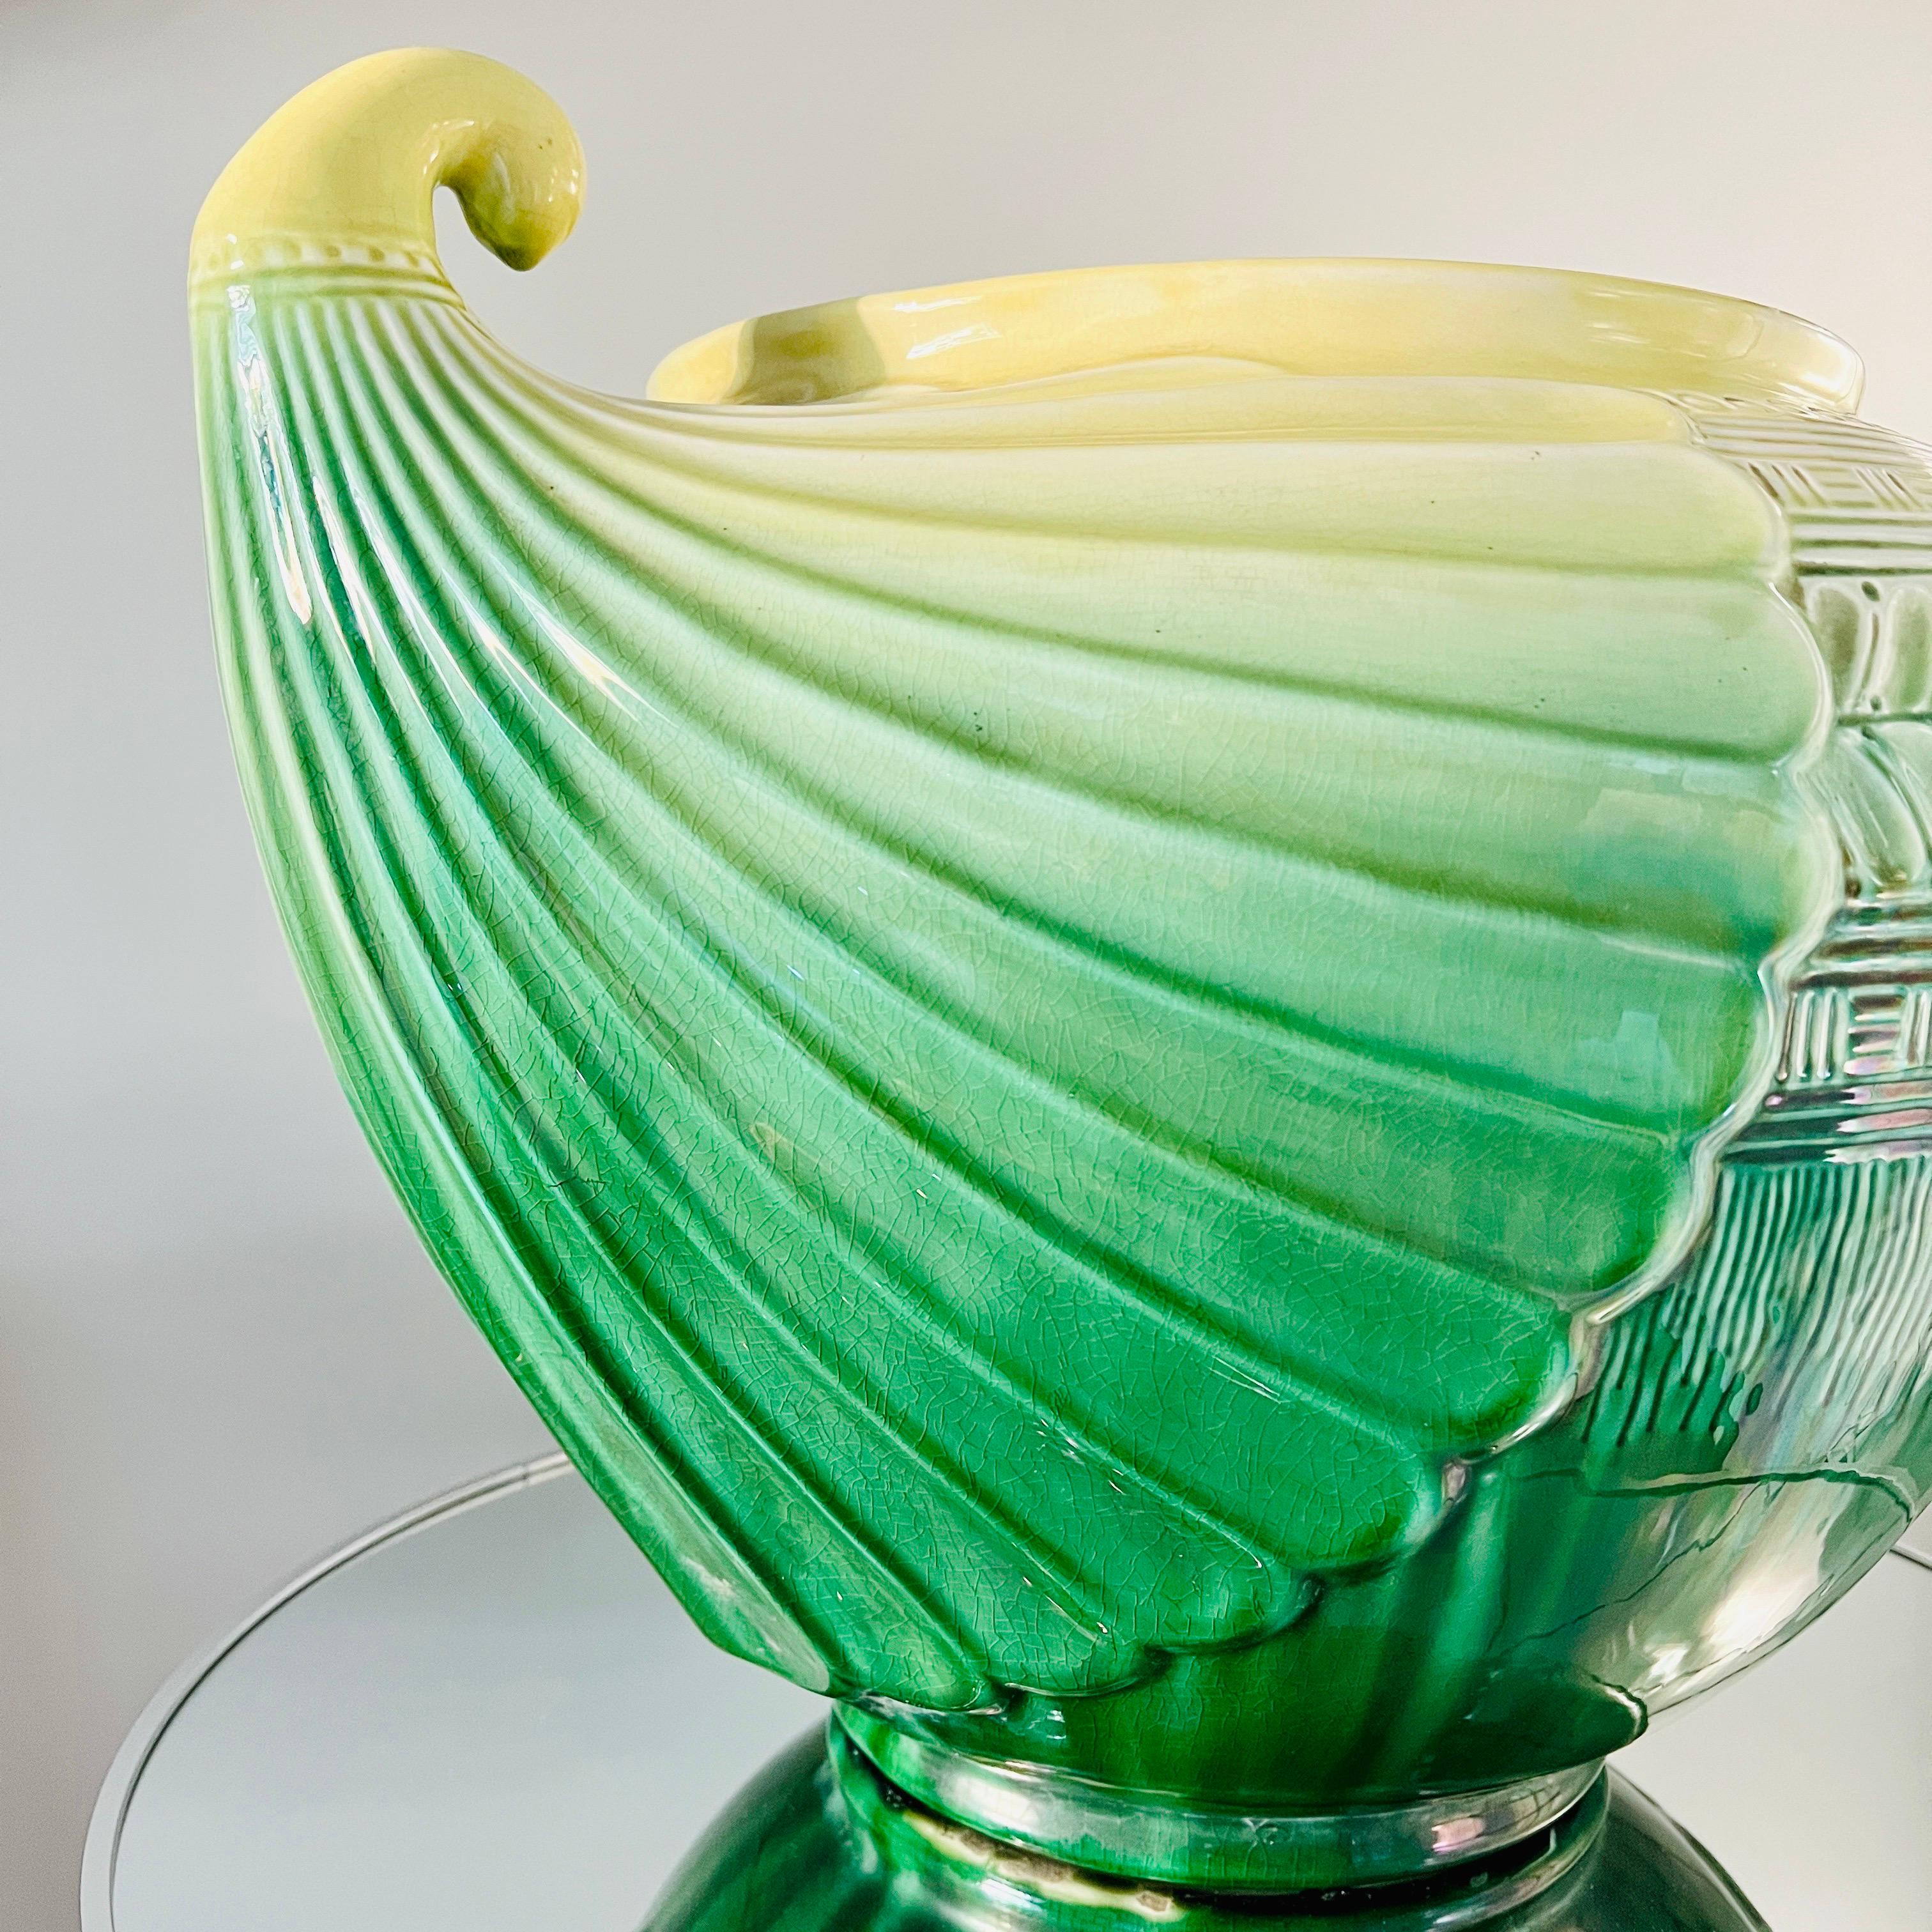 Glazed Art Nouveau Ceramic Cachepot in Green and Yellow by SCI Laveno, Italy c. 1910